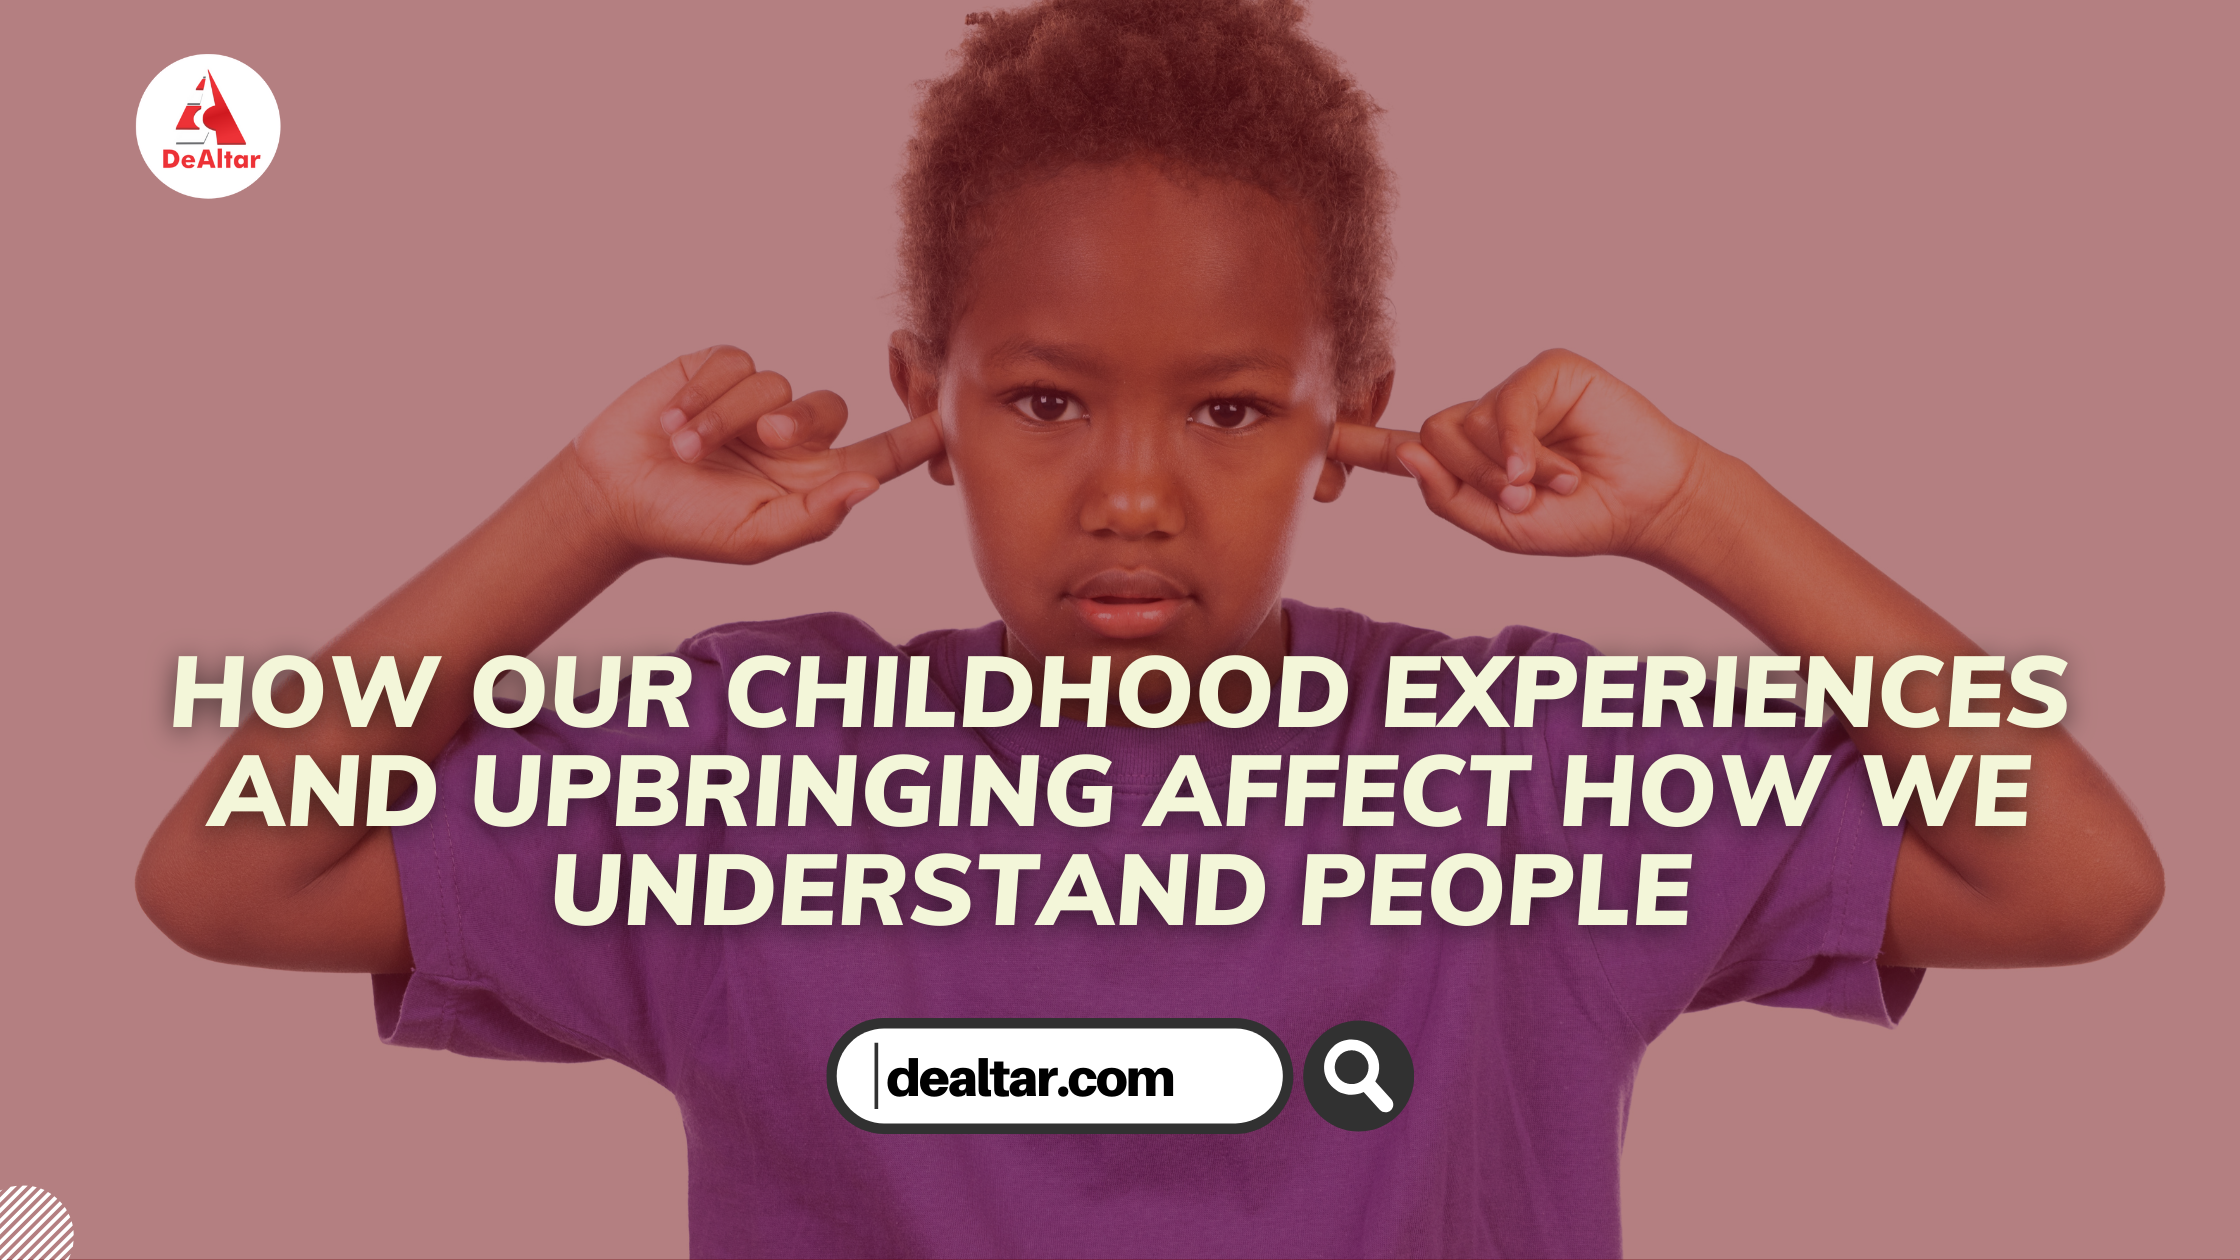 How Our Childhood Experiences And Upbringing Affect How We Understand People